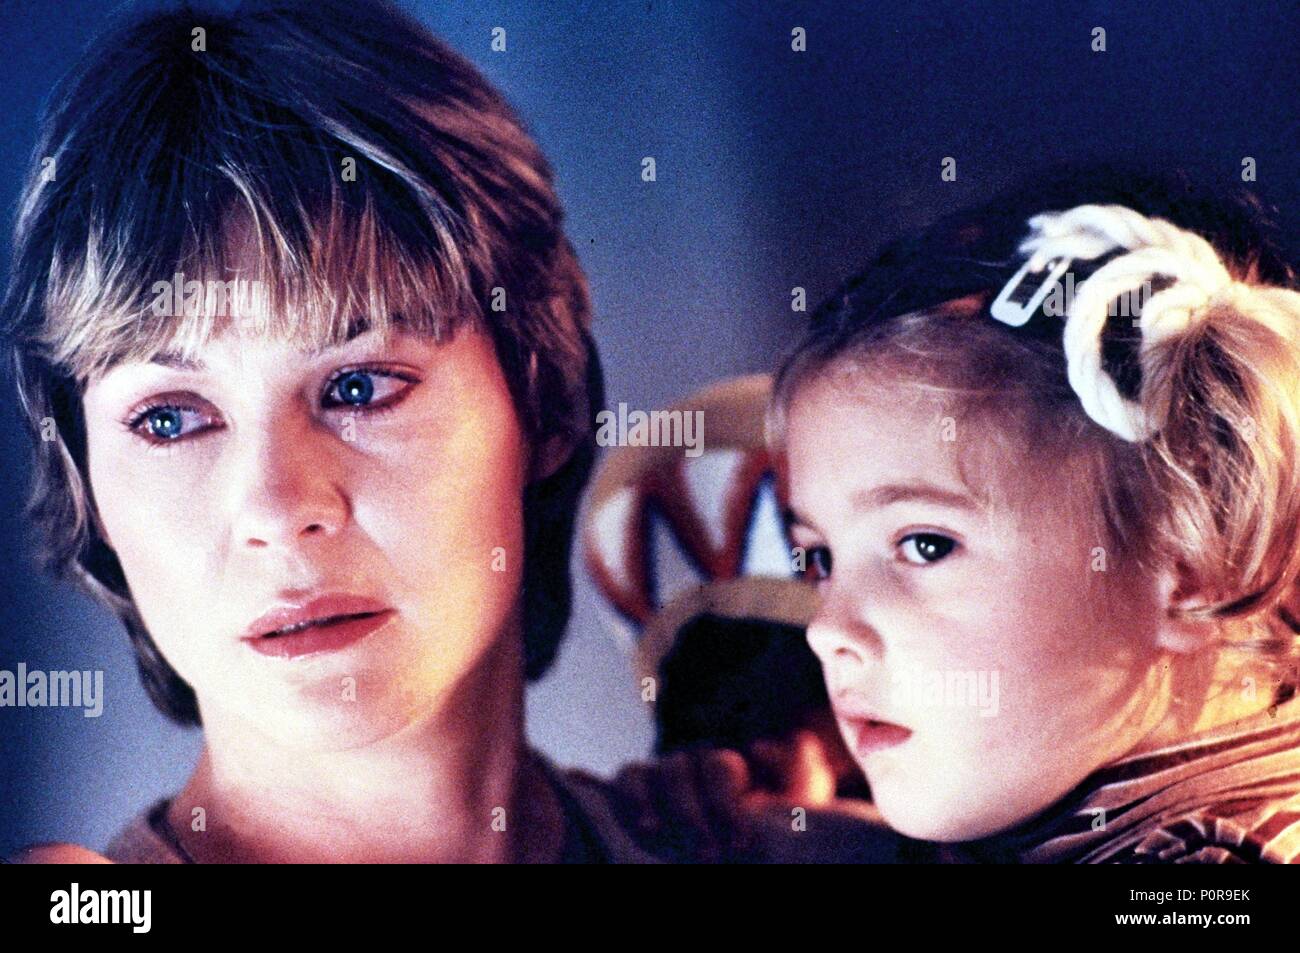 Original Film Title: E. T. THE EXTRA-TERRESTRIAL.  English Title: E. T. THE EXTRA-TERRESTRIAL.  Film Director: STEVEN SPIELBERG.  Year: 1982.  Stars: DREW BARRYMORE; DEE WALLACE-STONE. Credit: UNIVERSAL PICTURES / Album Stock Photo